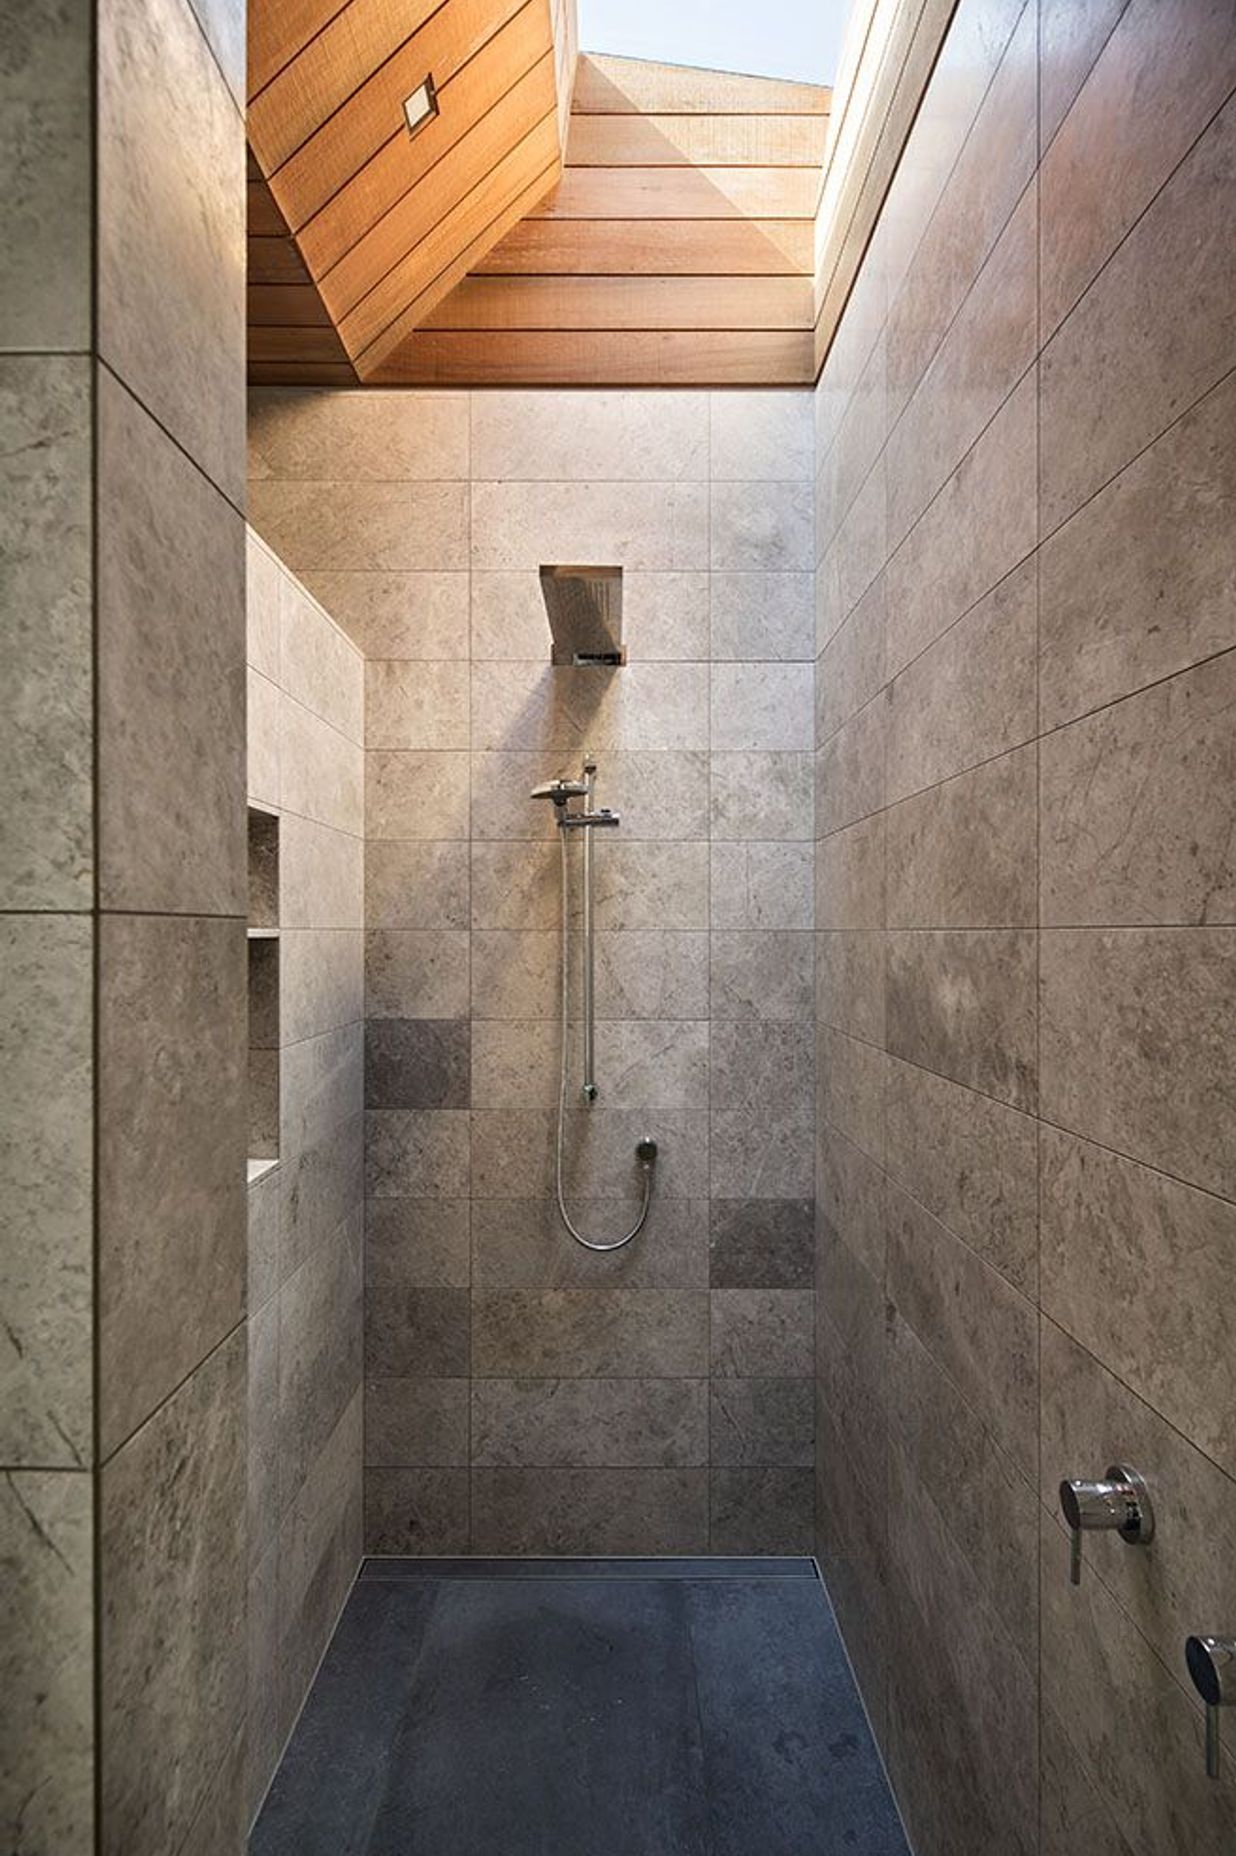 This shower features a skylight to draw in light from above.